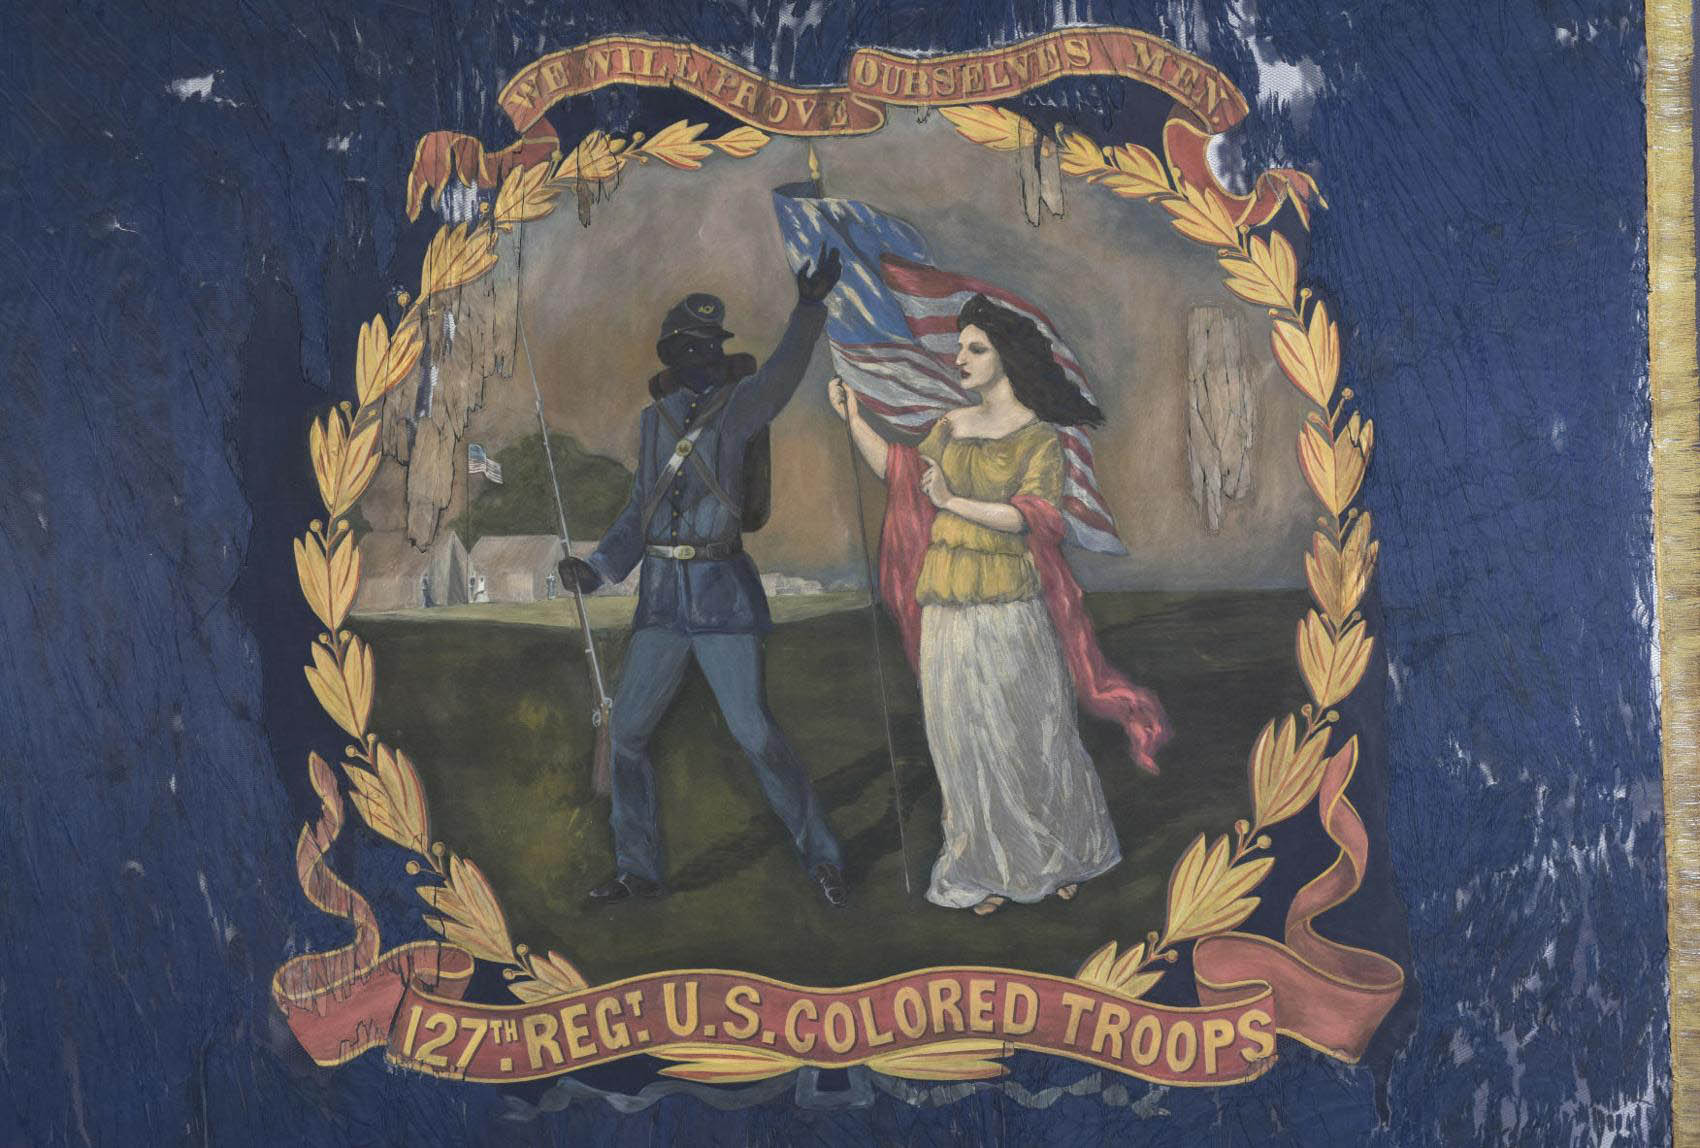 127th Regiment United States Colored Troops battle flag during the Civil War